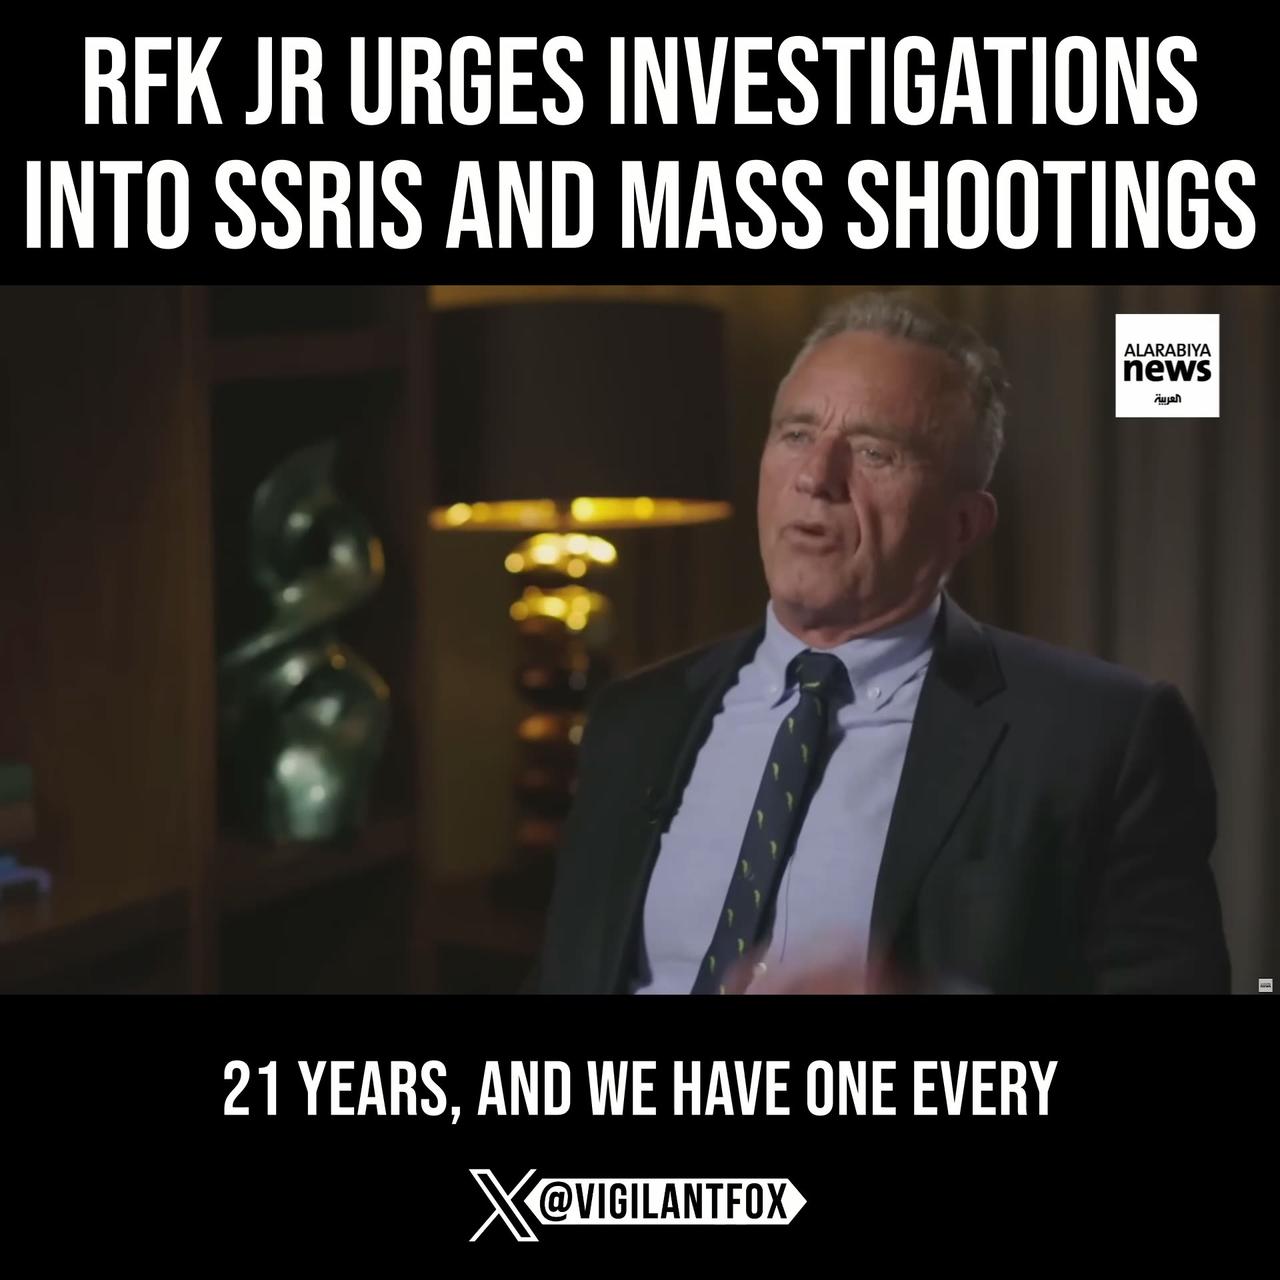 RFK Jr. Urges Investigations Into SSRIs and Mass Shootings